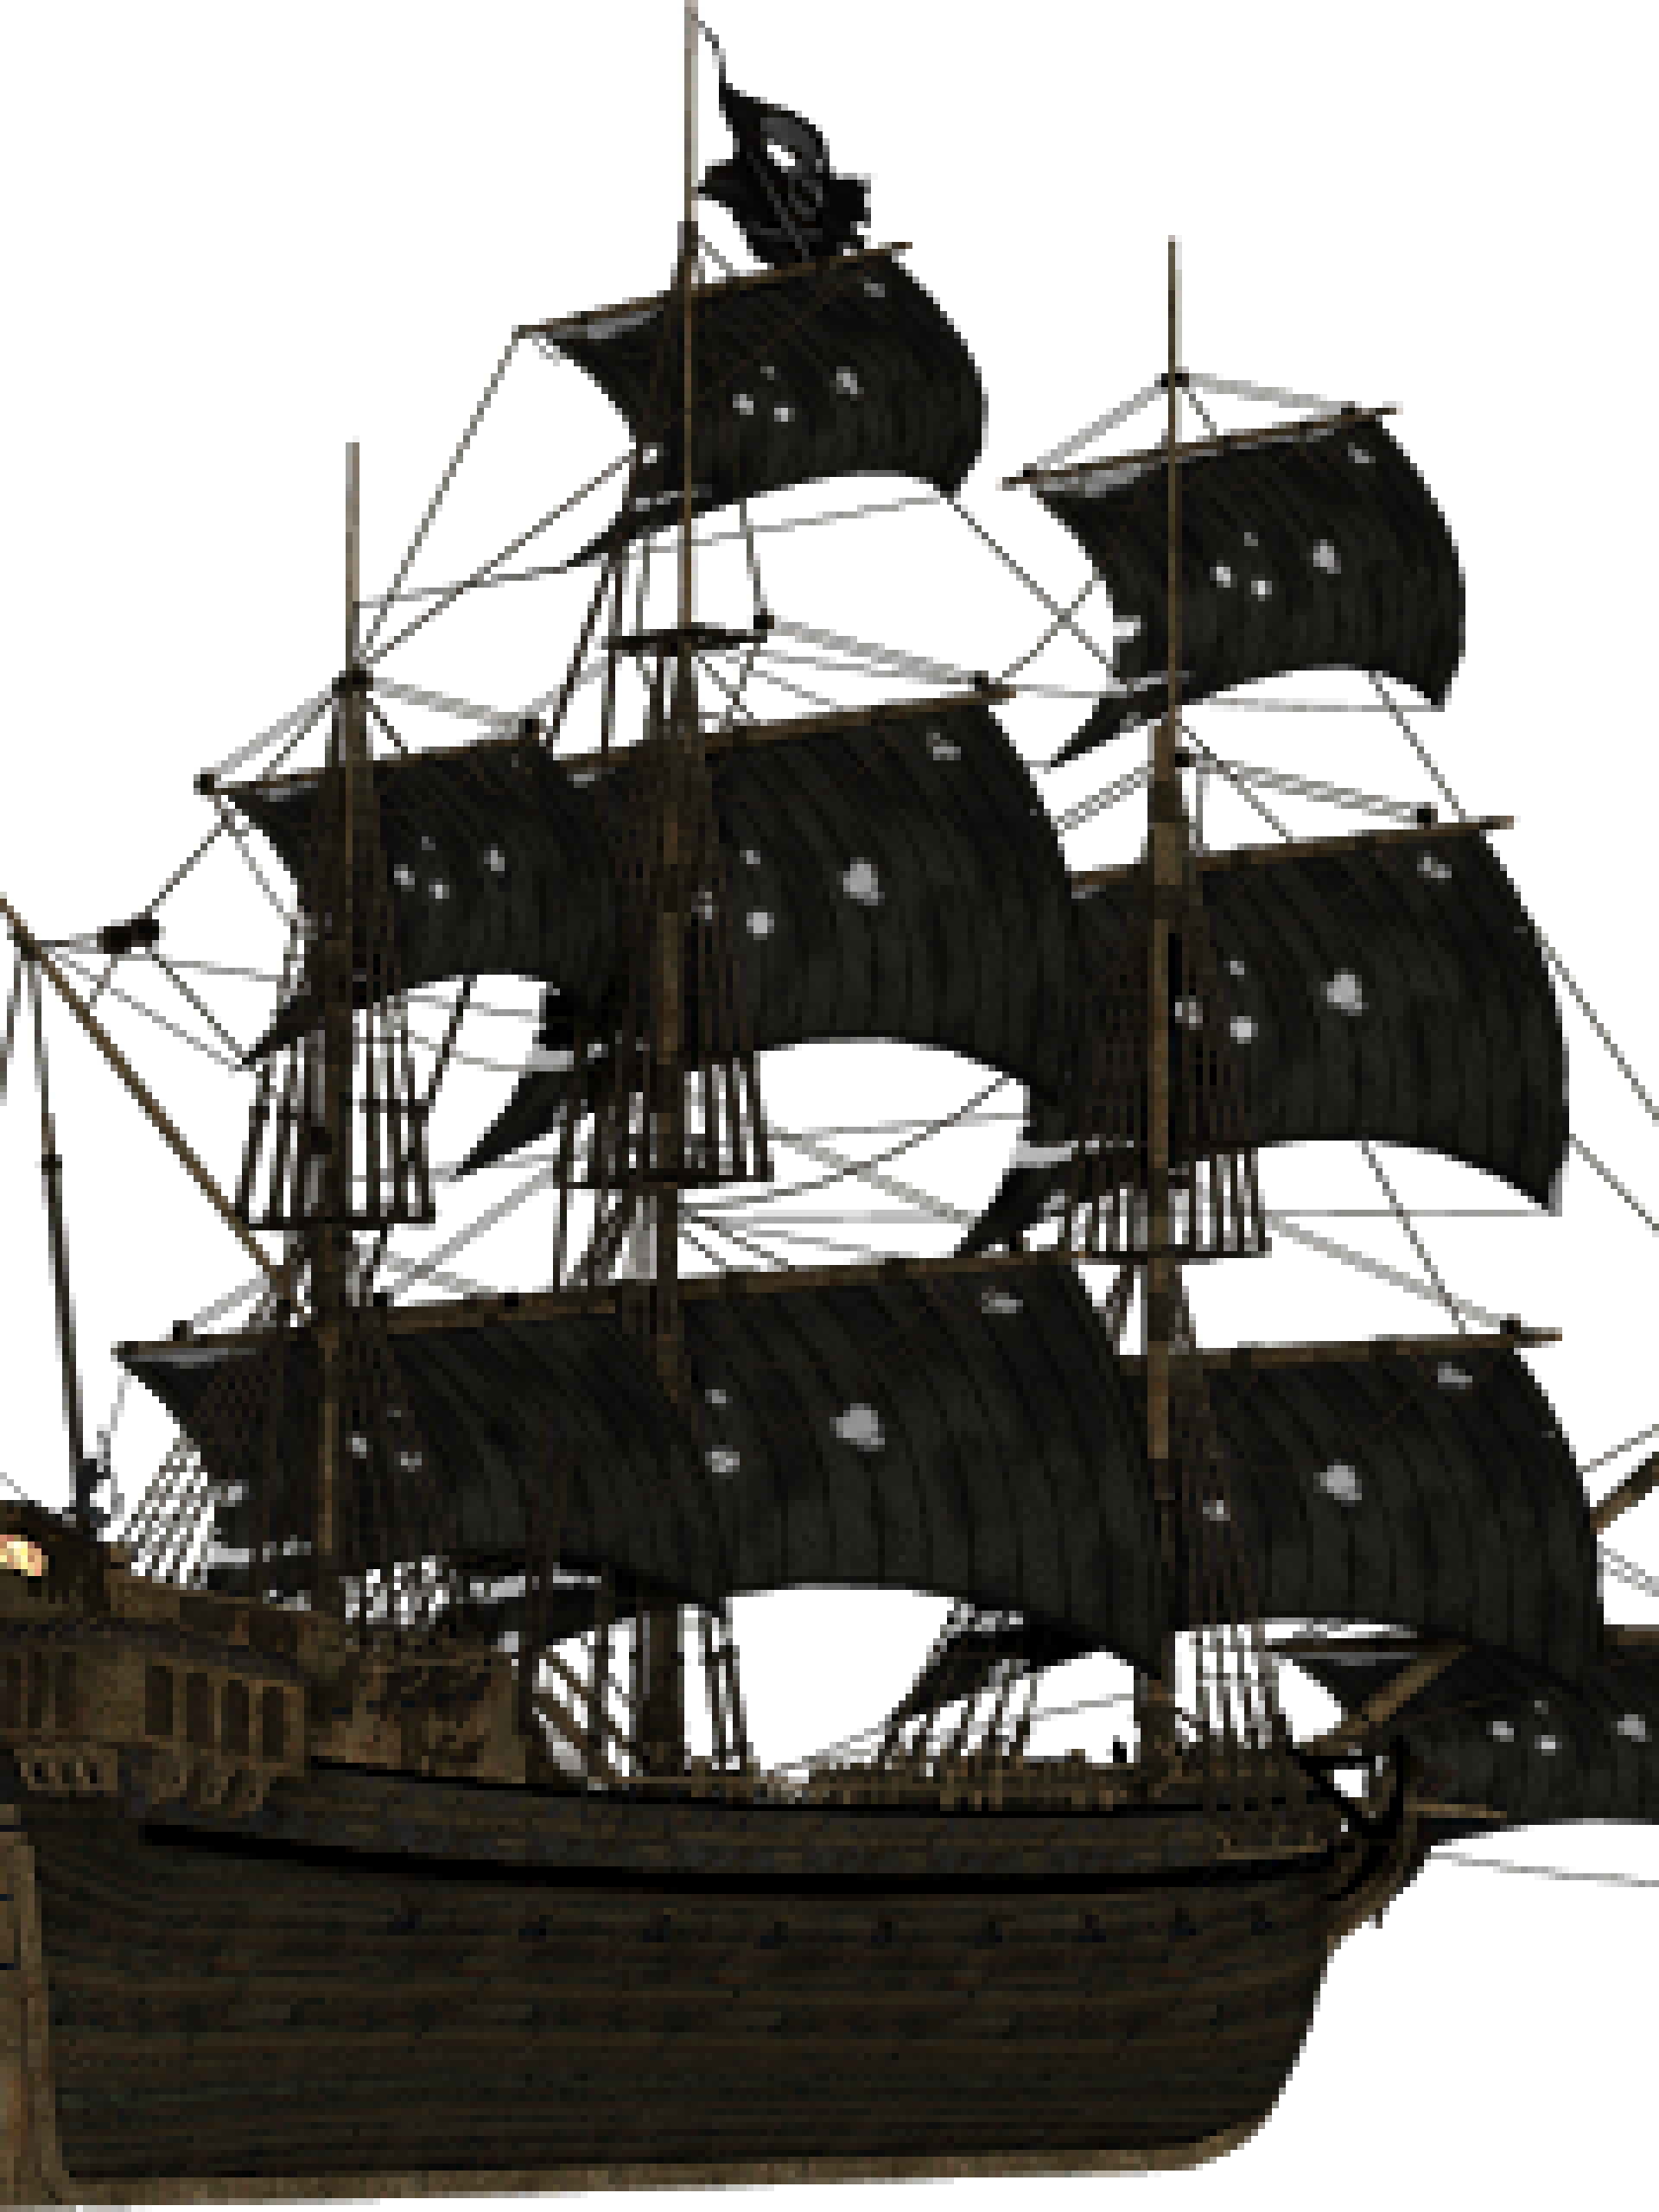 A Ship With Sails And Ropes